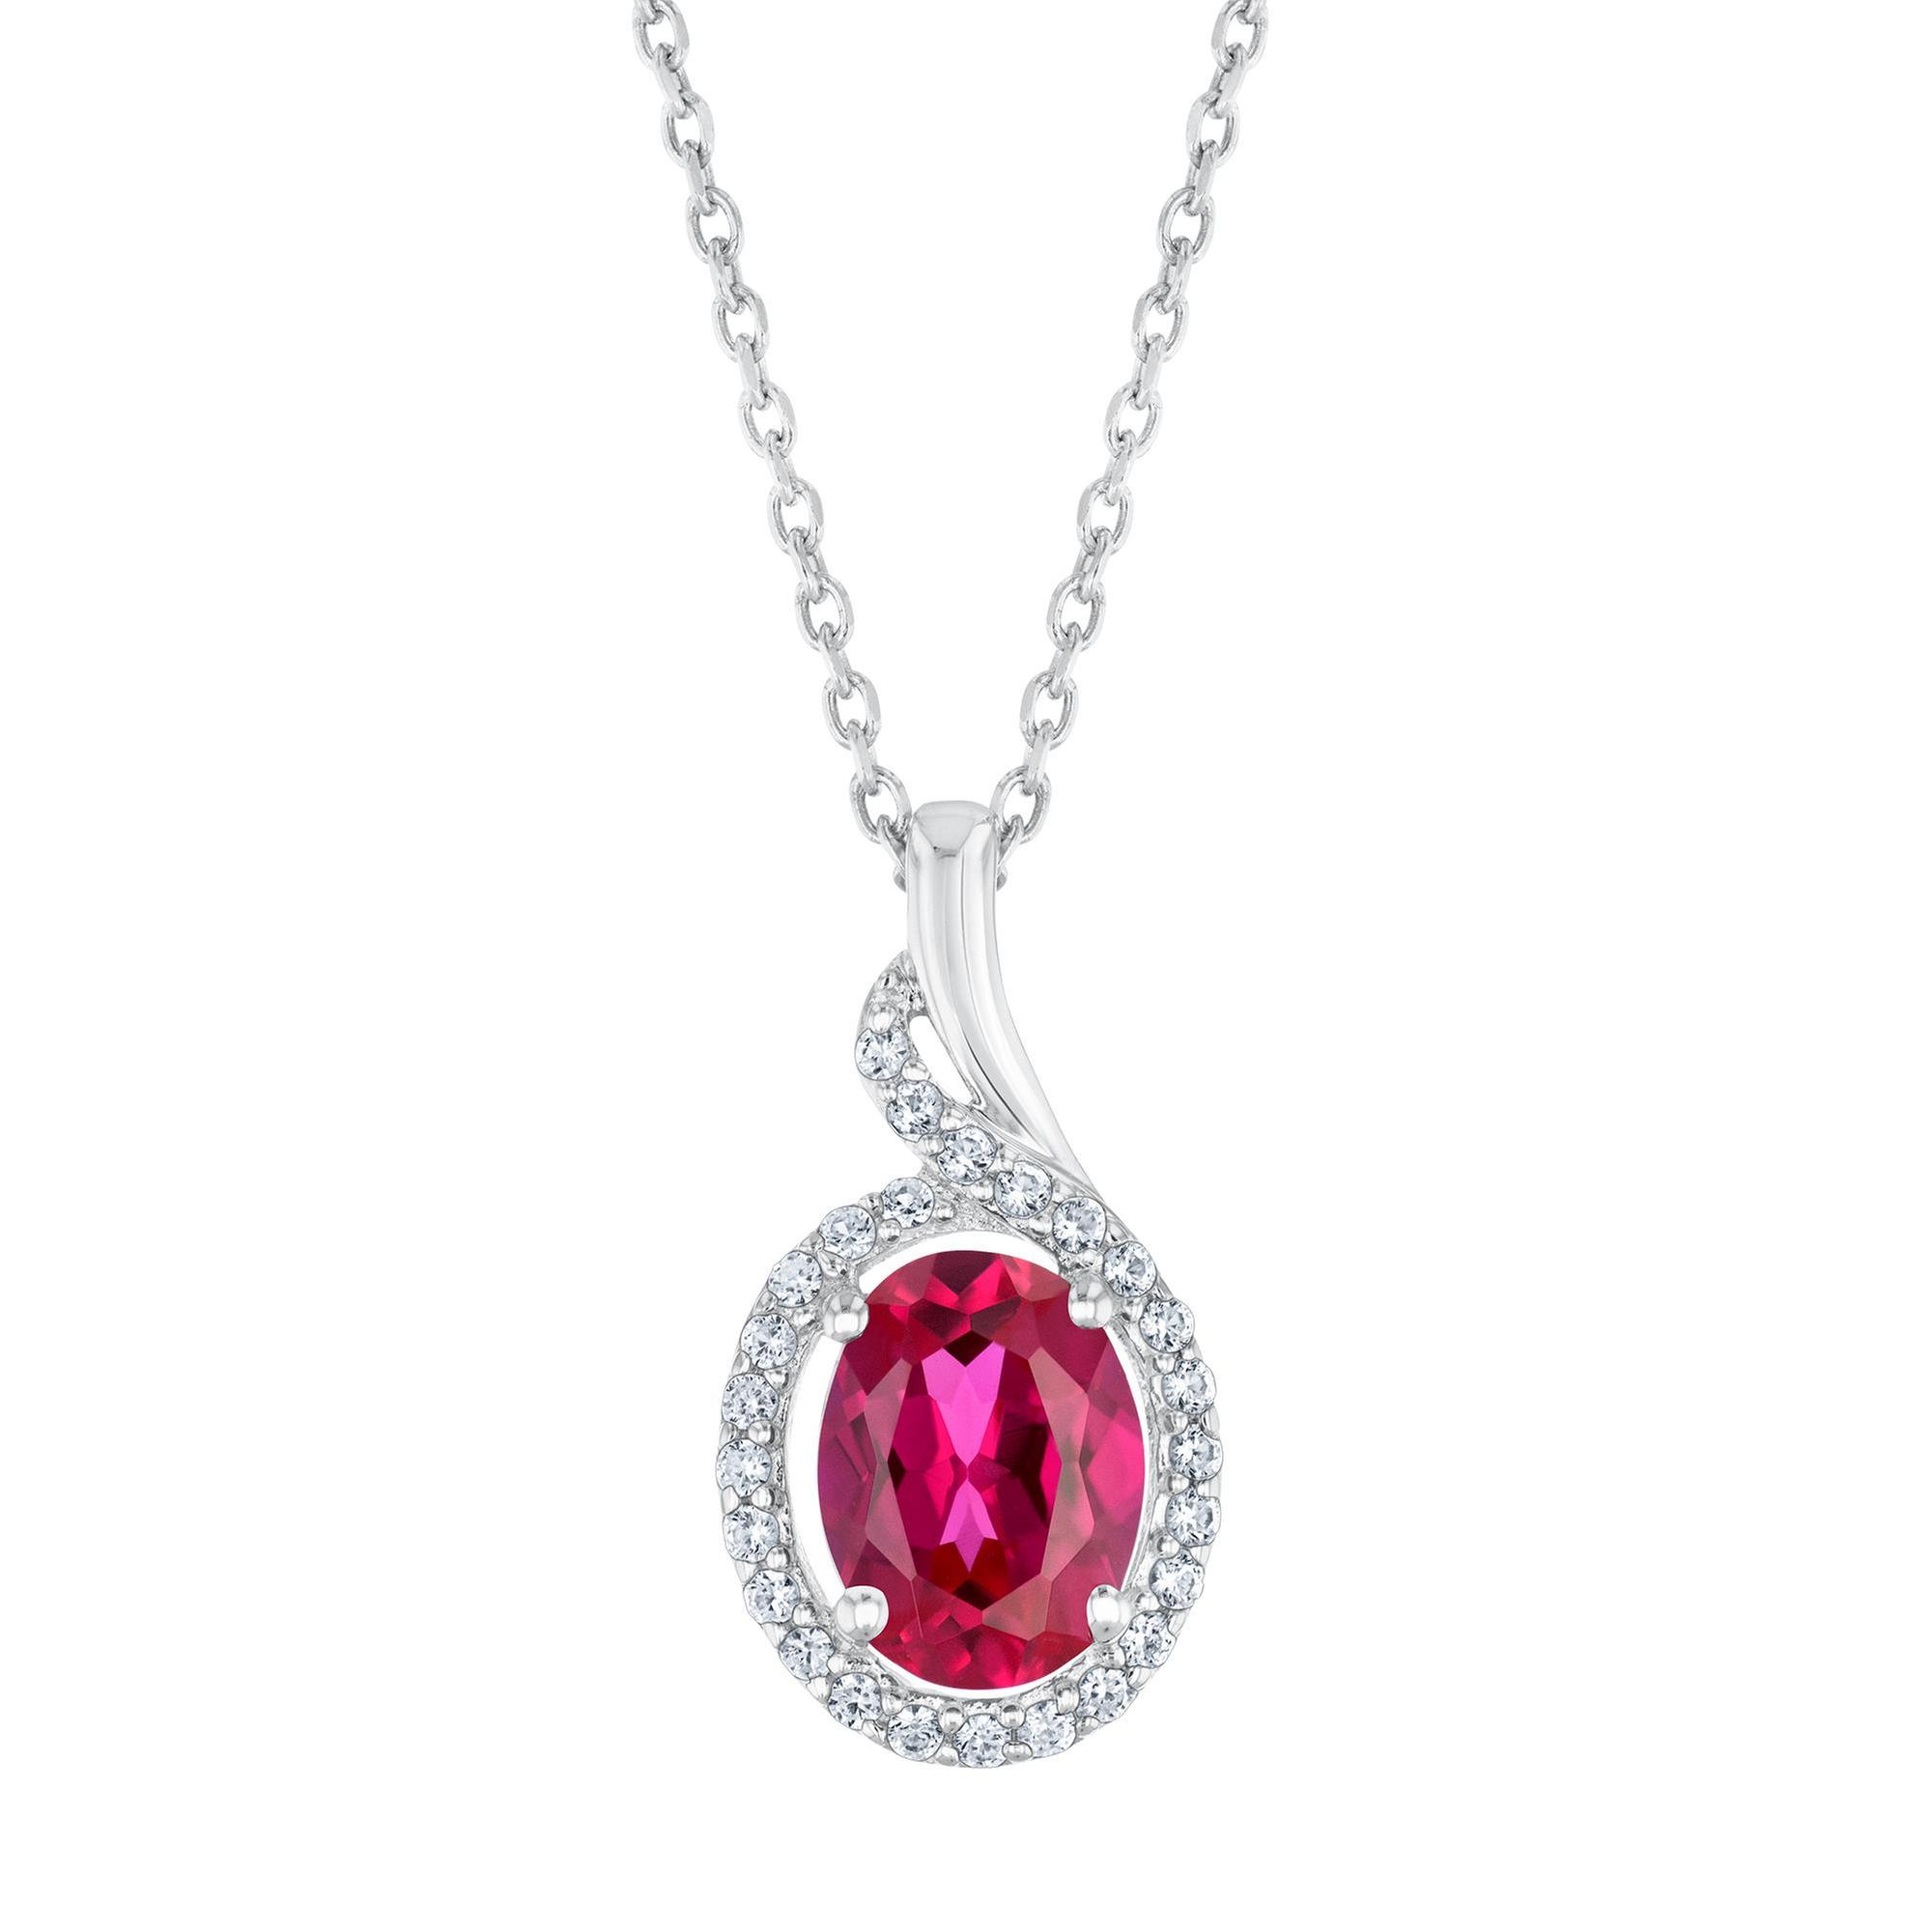 5mm x 10mm Sonia Jewels Sterling Silver Diamond & Simulated Ruby Oval Pendant 